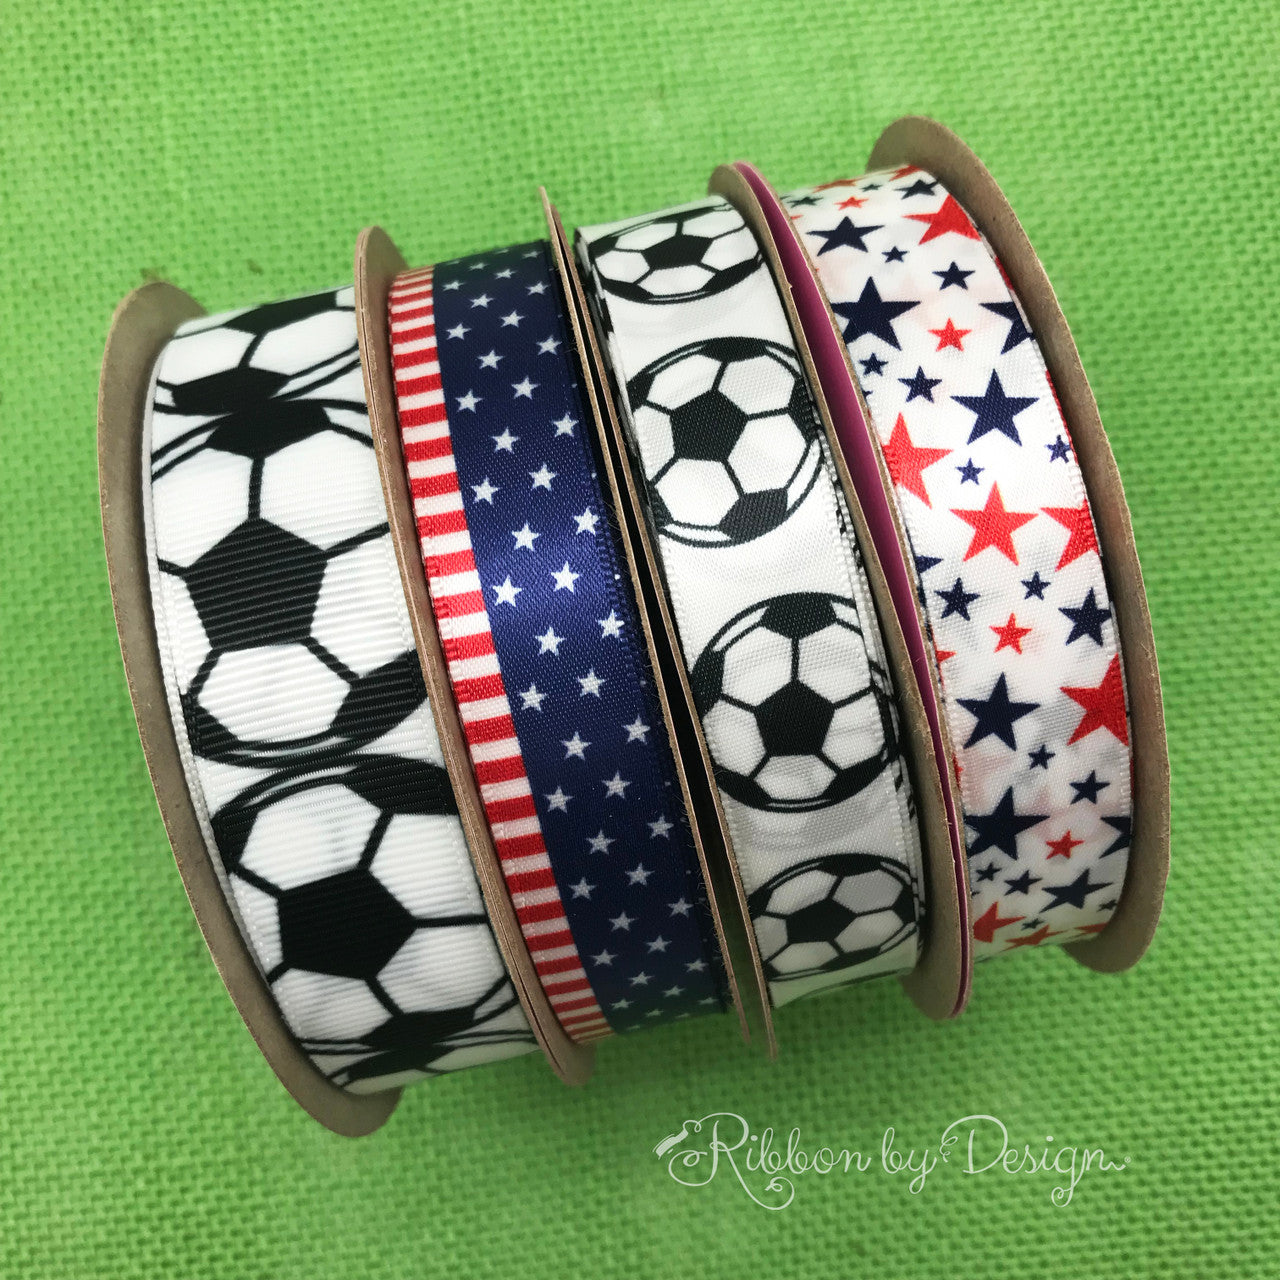 Our soccer ribbon comes in two widths and fabrics! Mix and match with our all American ribbons to round out the party!